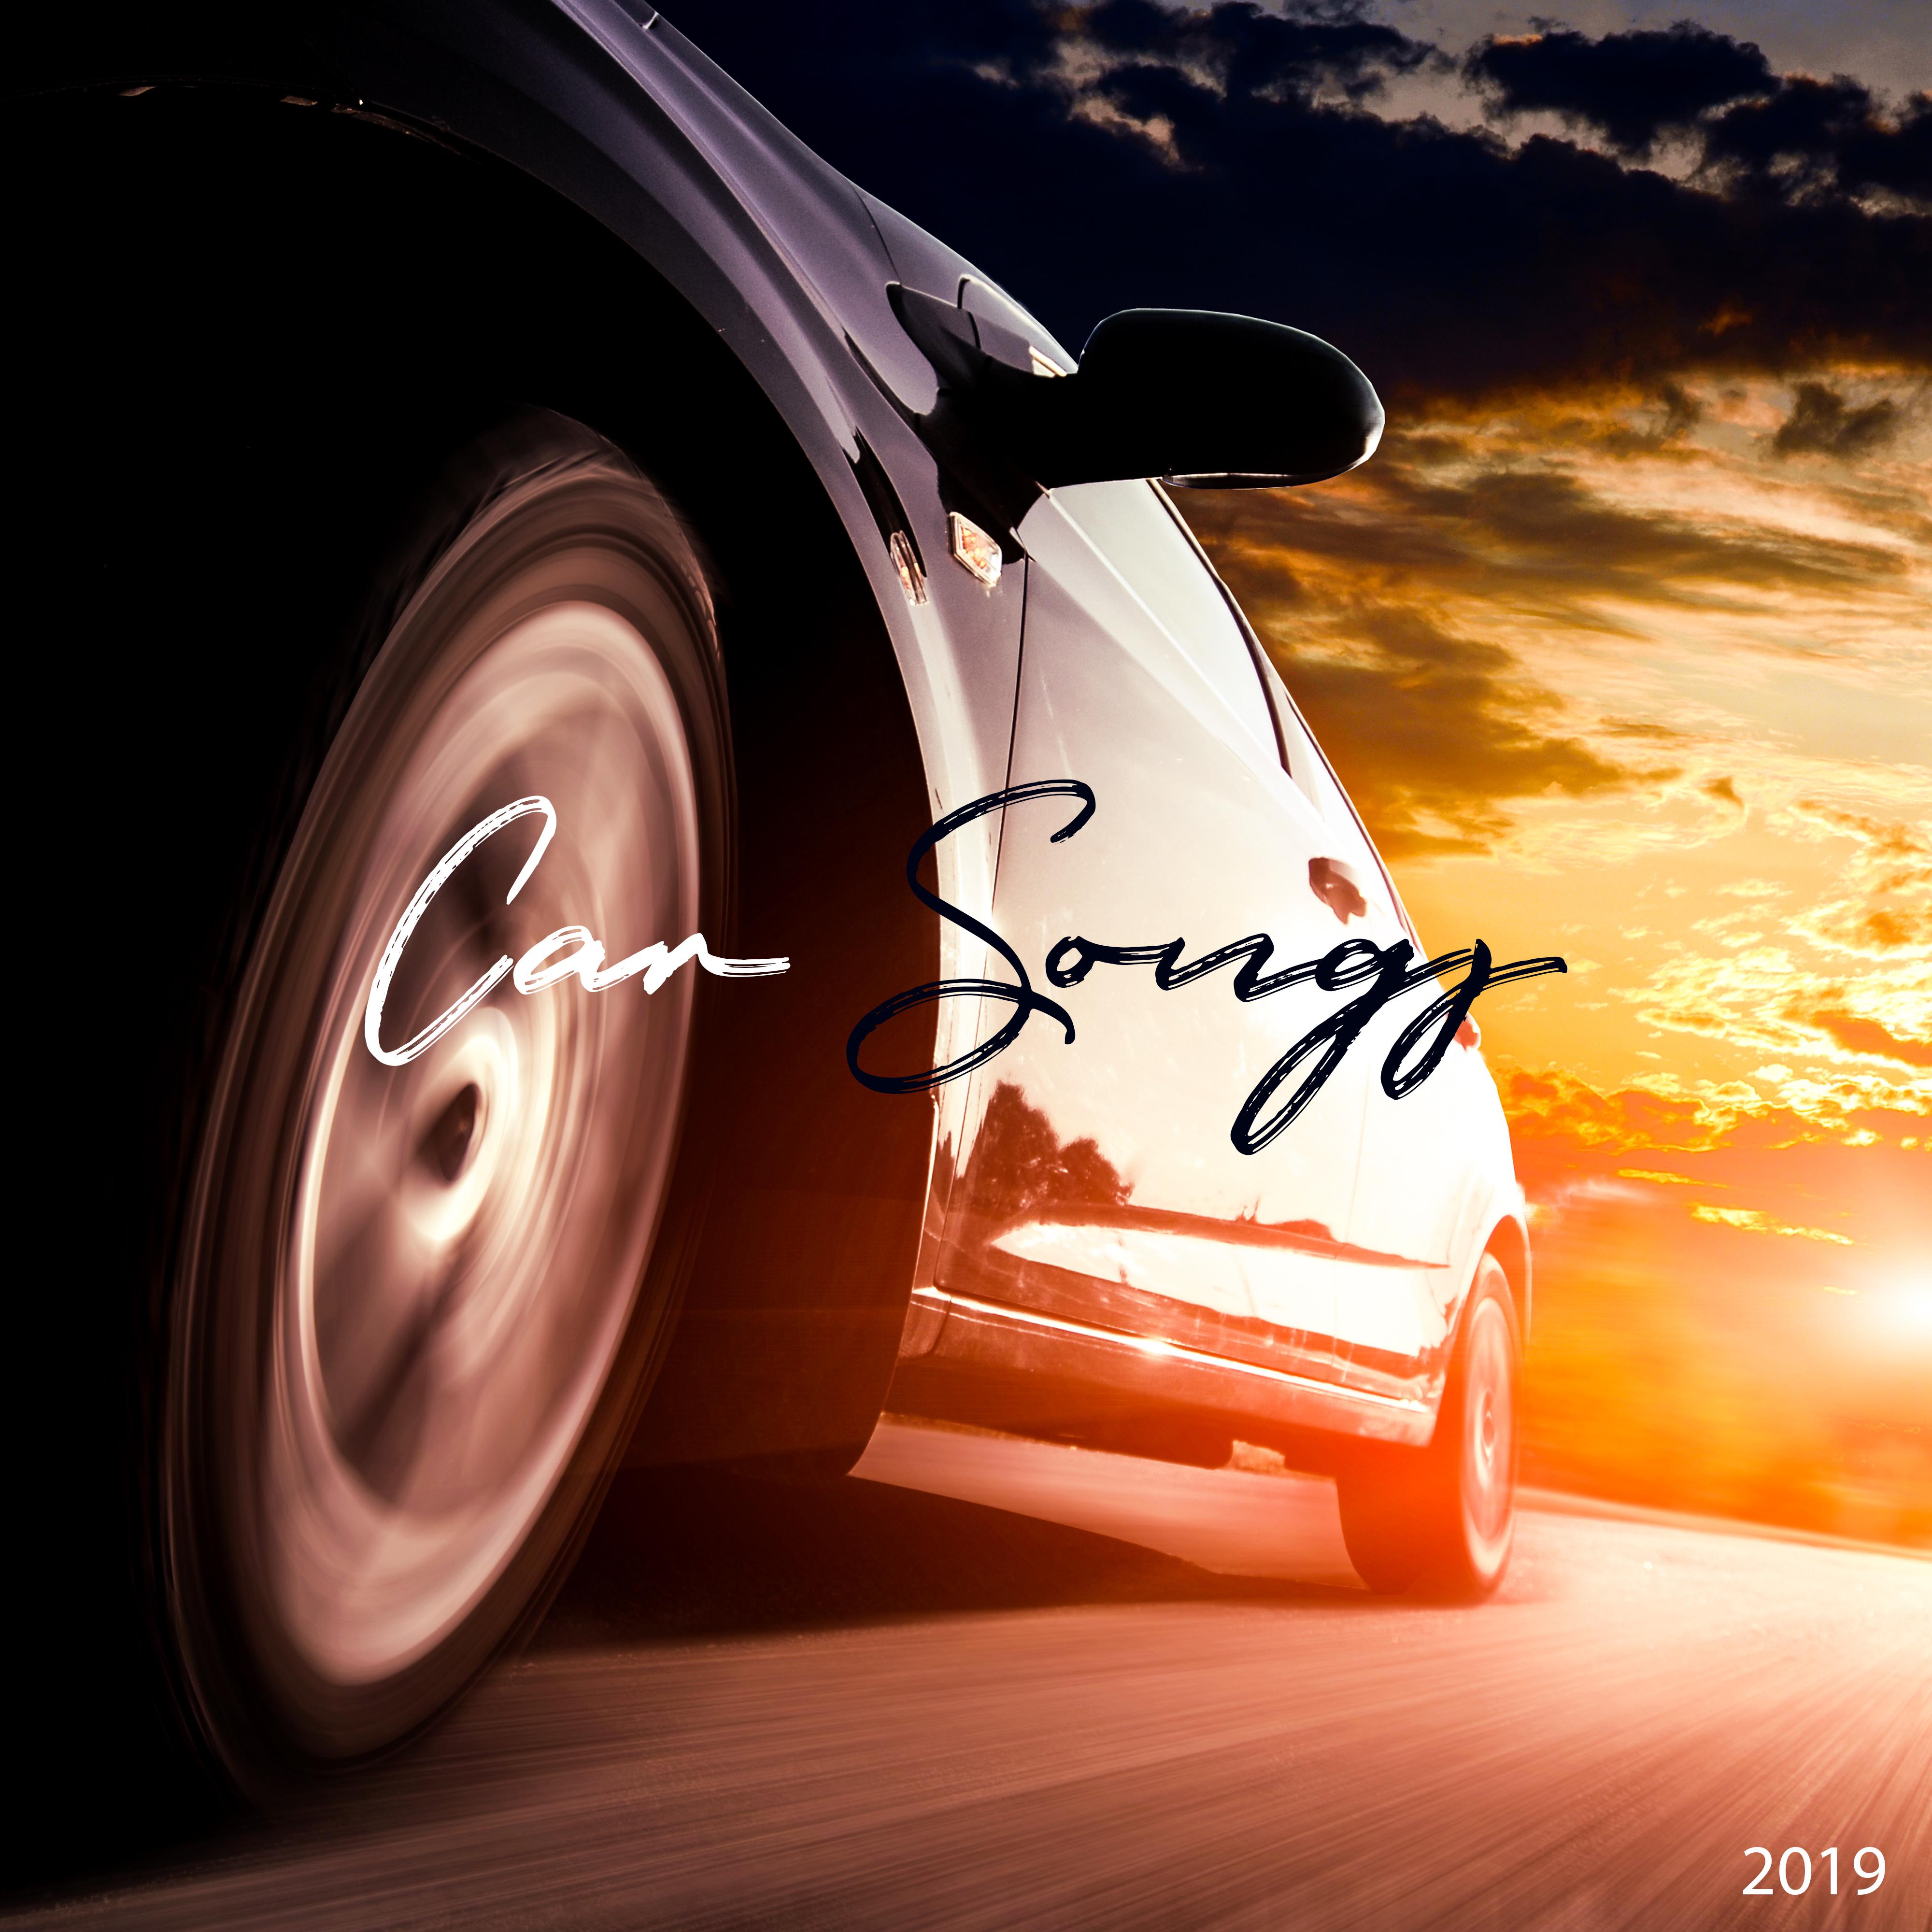 Car Songs 2019: Dance Music, Deep House Lounge, Music for Car, Lounge, Chill Out 2019